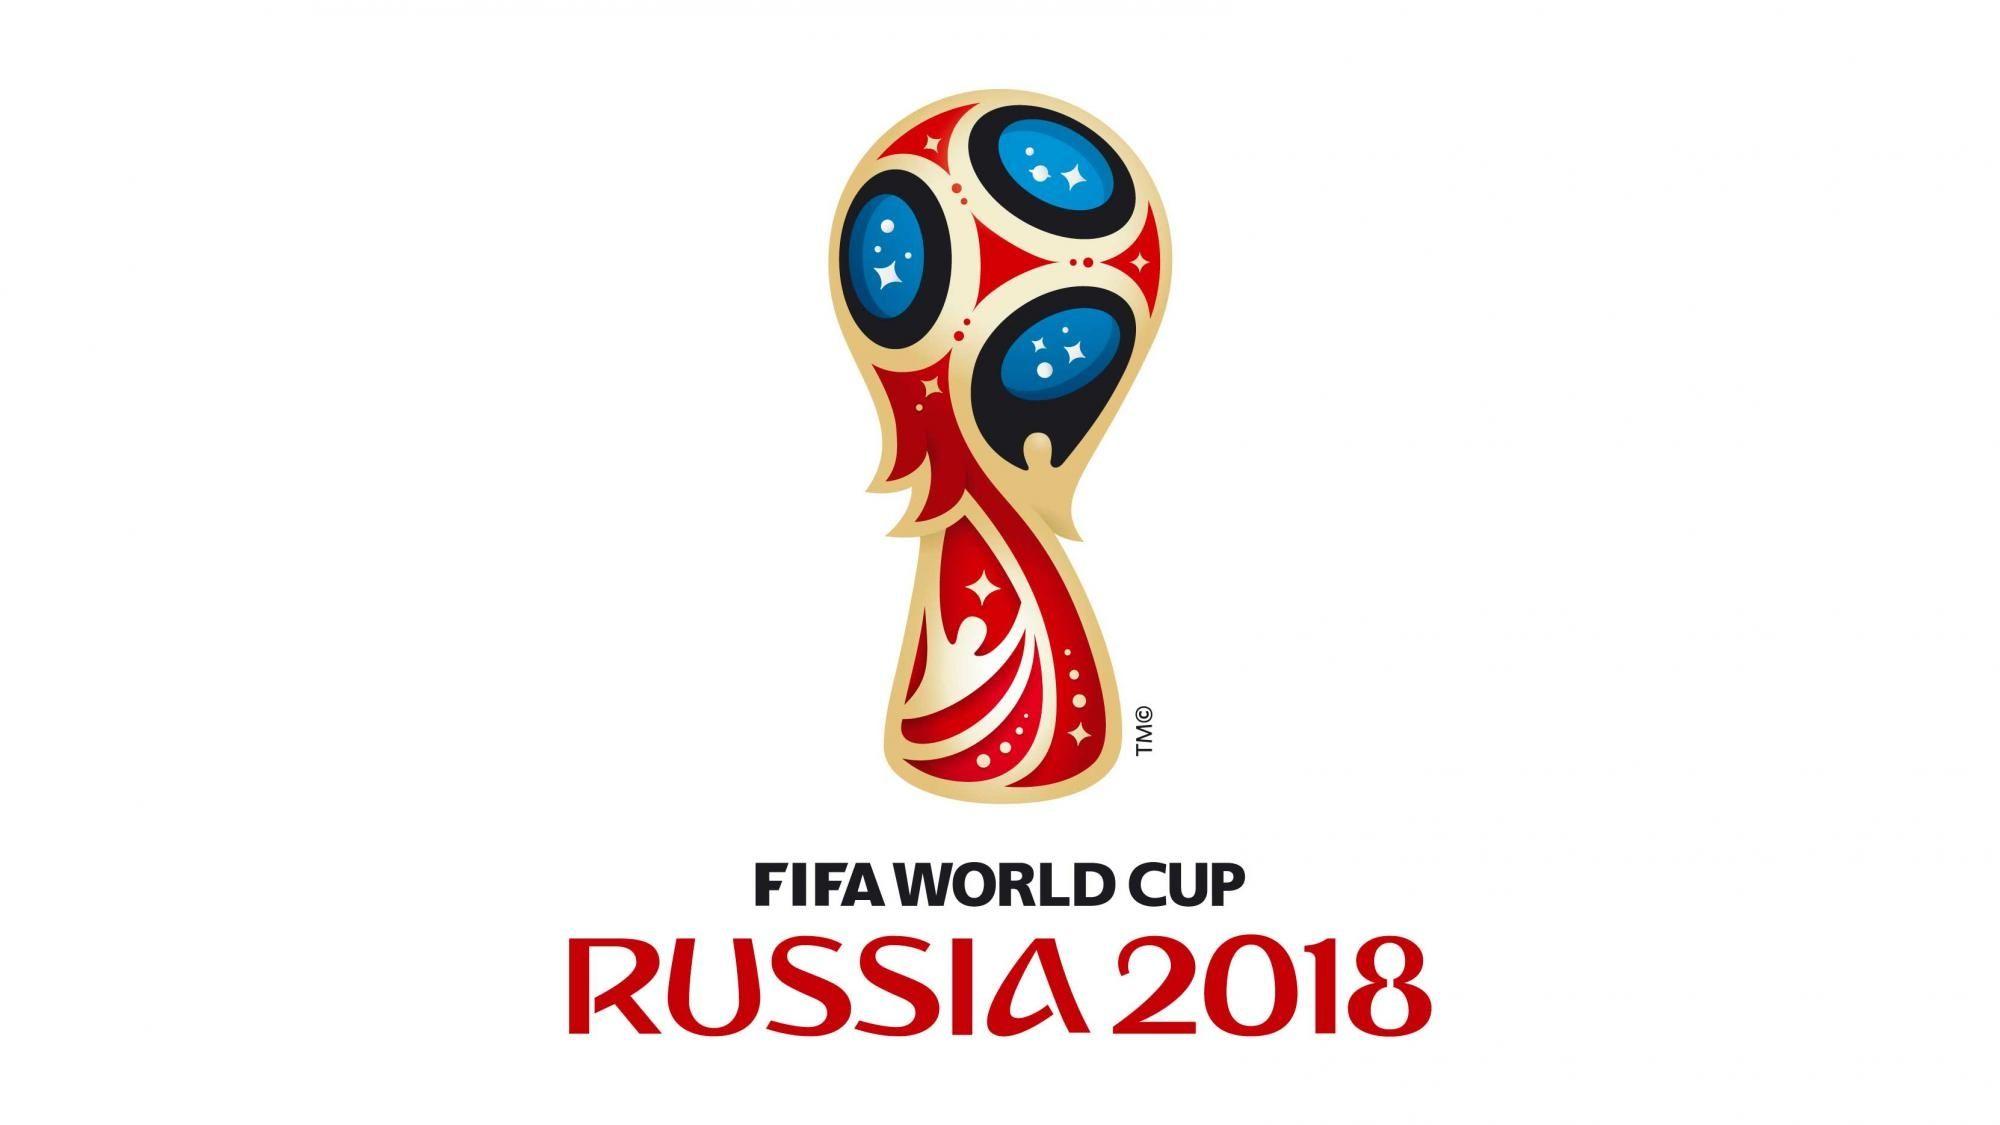 2018 Fifa World Cup Wallpapers Wallpaper Cave